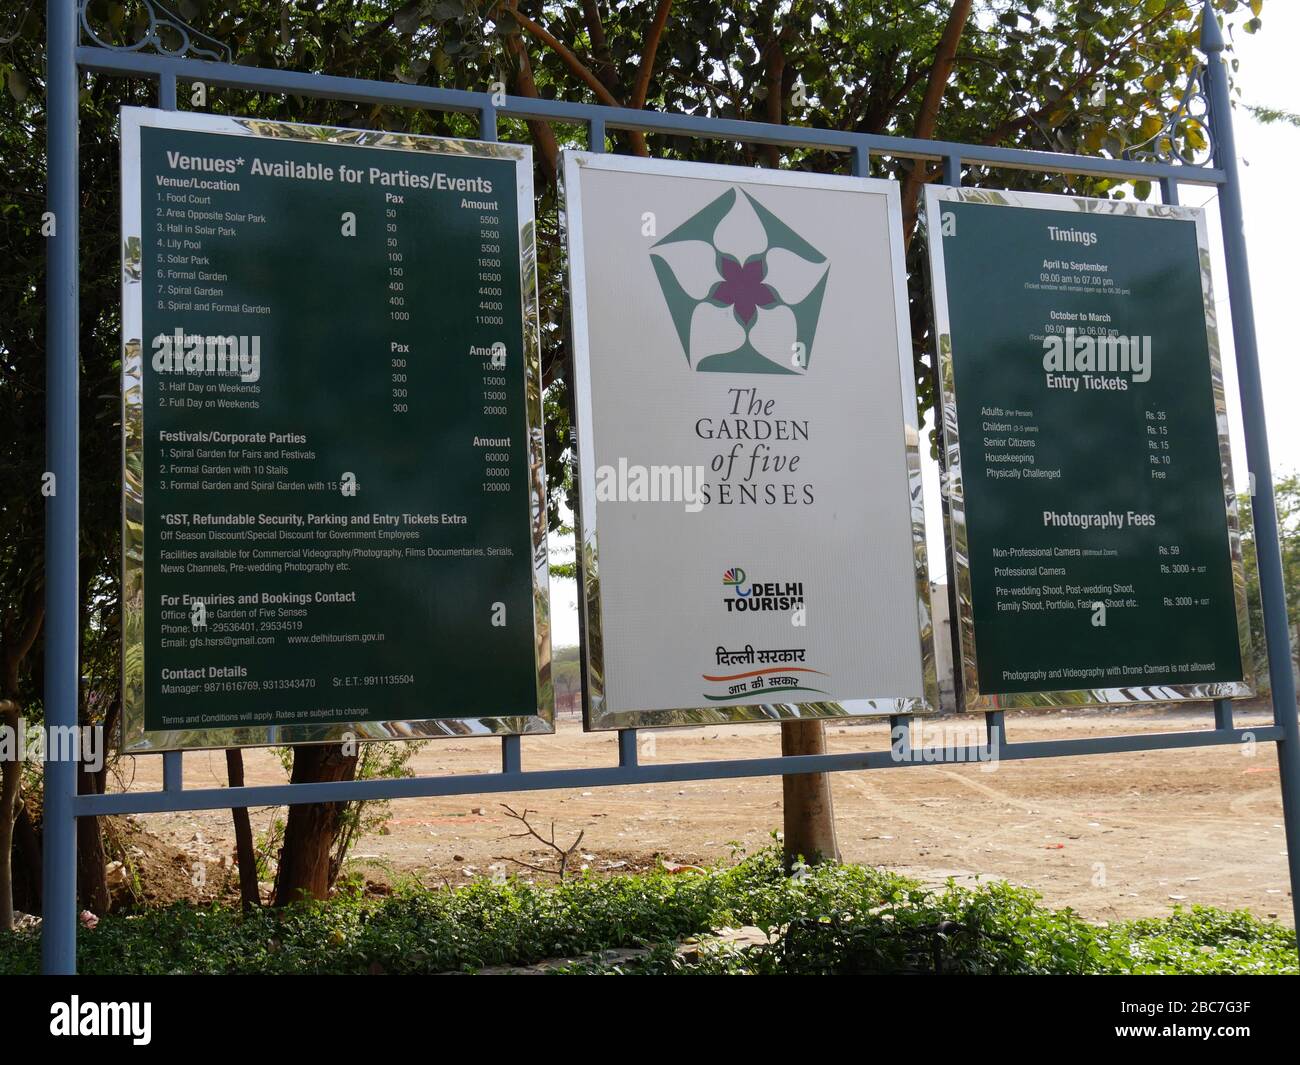 New Delhi, India- March 2018: Billboard with information at the entrance of the Garden of Five Senses, one of the top attractions in New Delhi. Stock Photo